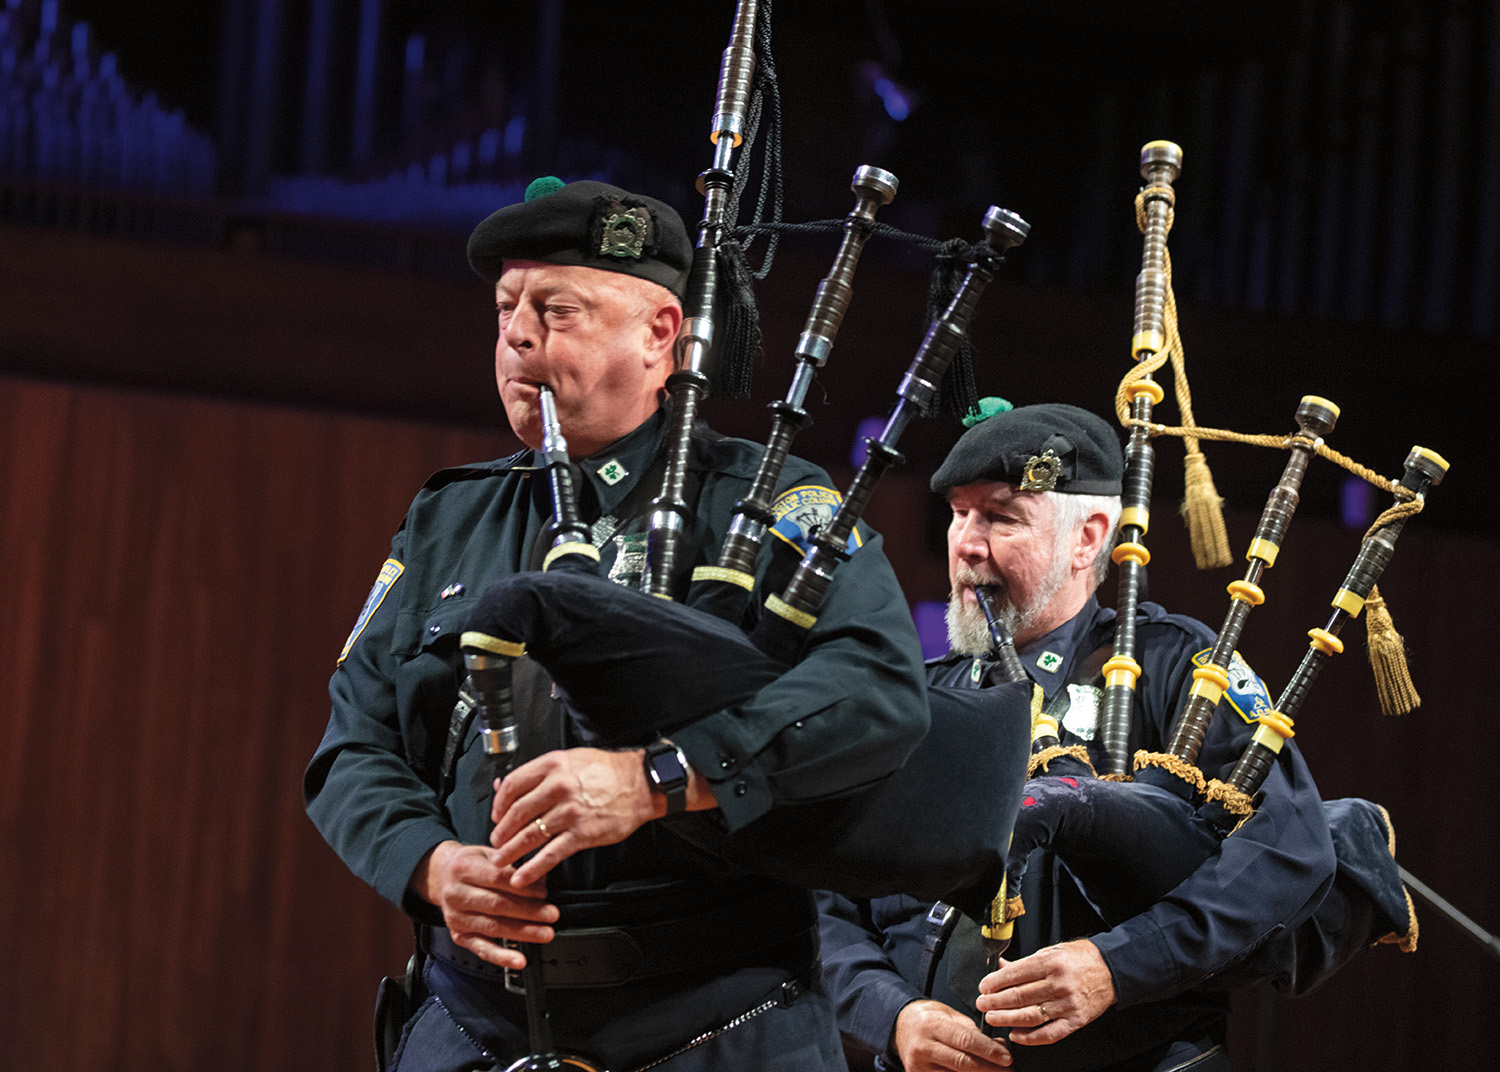 On the left, a person with pale skin plays a bagpipe. His cheeks are puffed. He wears a police uniform with badges and pins. On his head is a black beret with a green pom-pom on top. On the right, a person with pale skin and a white beard plays a bagpipe. He bites one of the reed pipes. He wears a police uniform with badges and pins. On his head is a black beret with a green pom-pom on top.